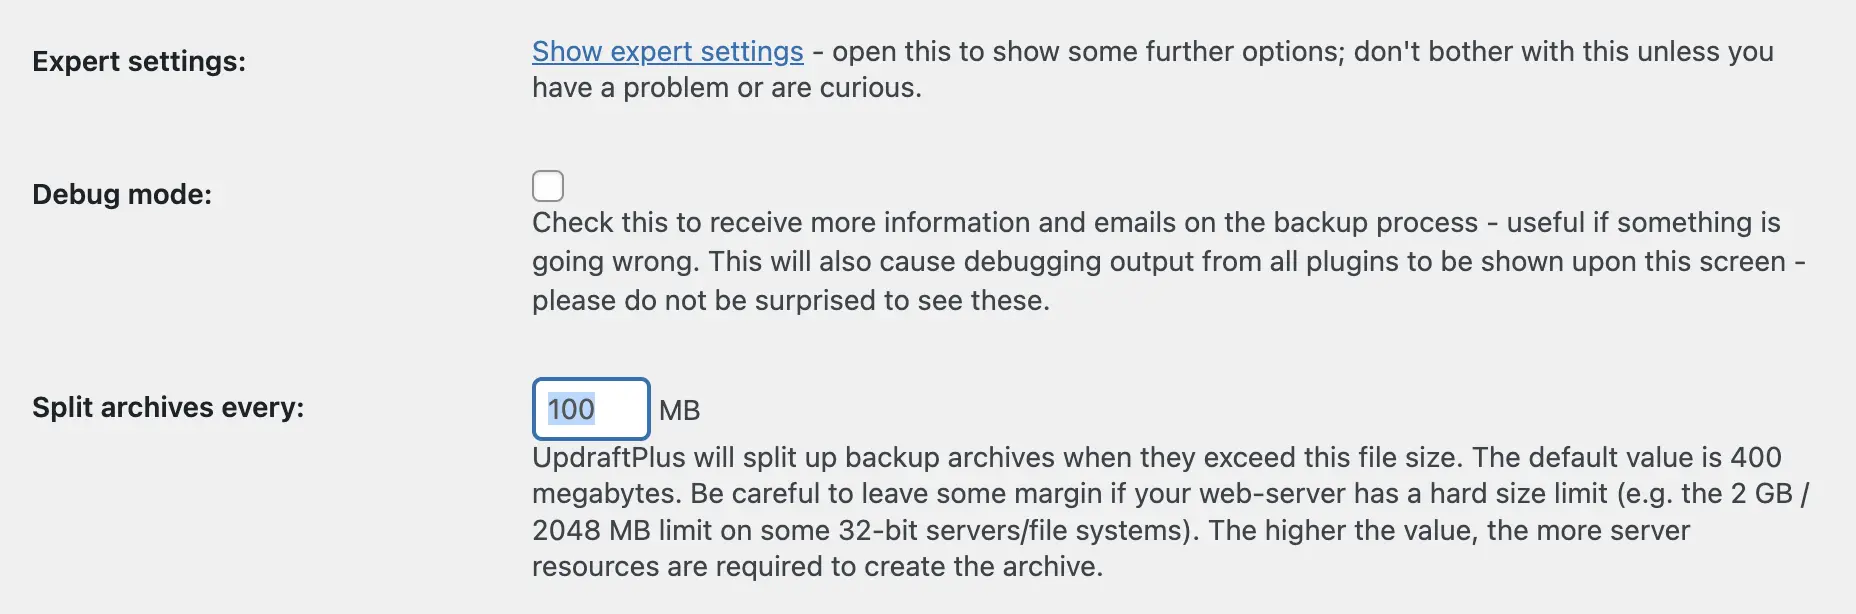 split-archives-every-option-in-updraftplus-settings